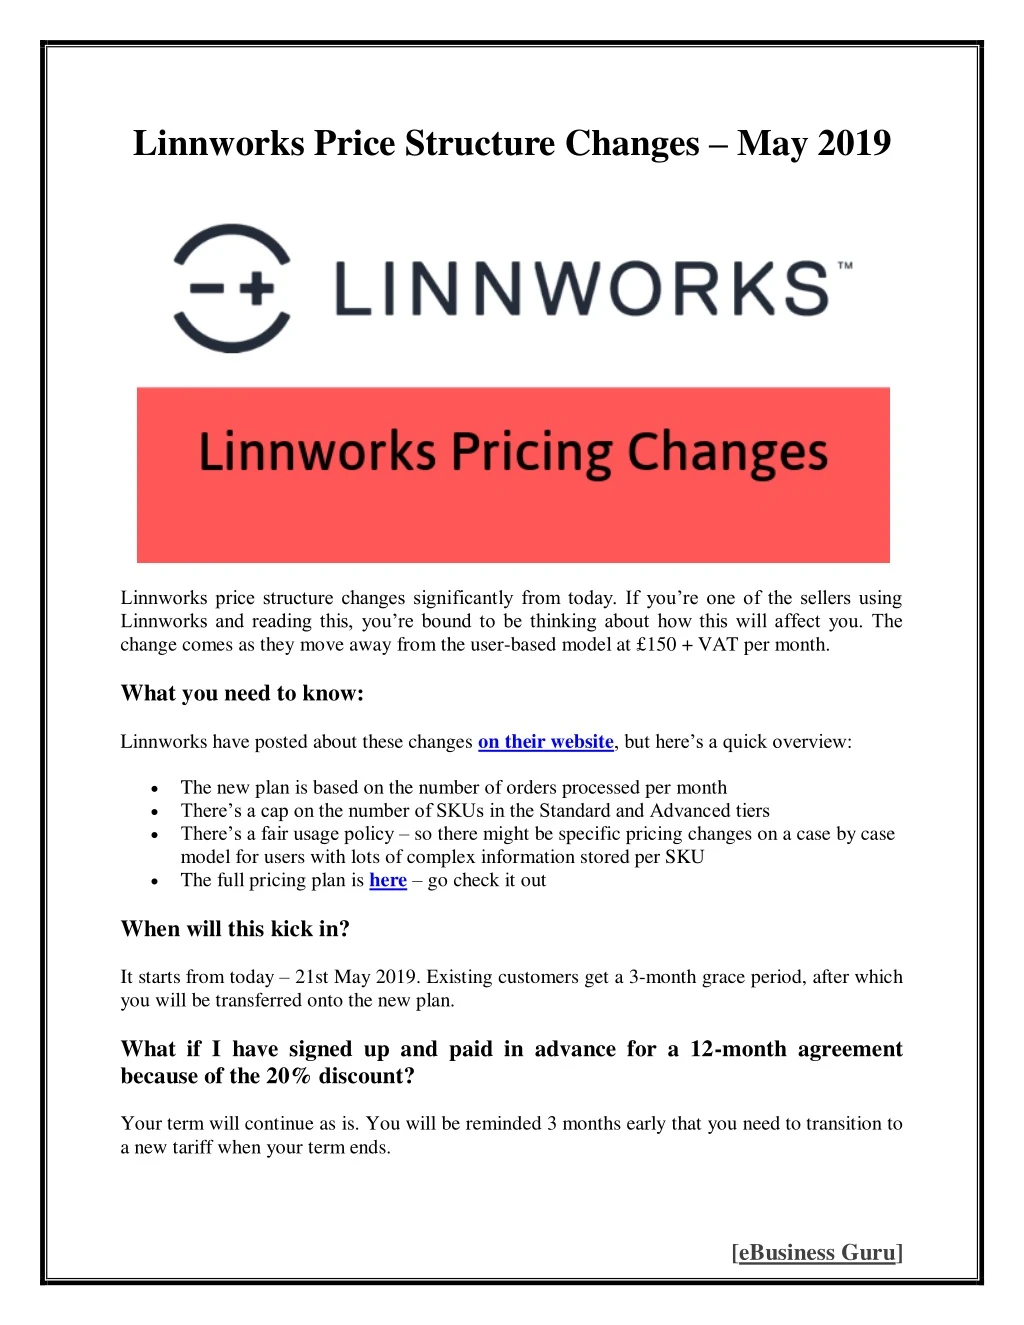 linnworks price structure changes may 2019